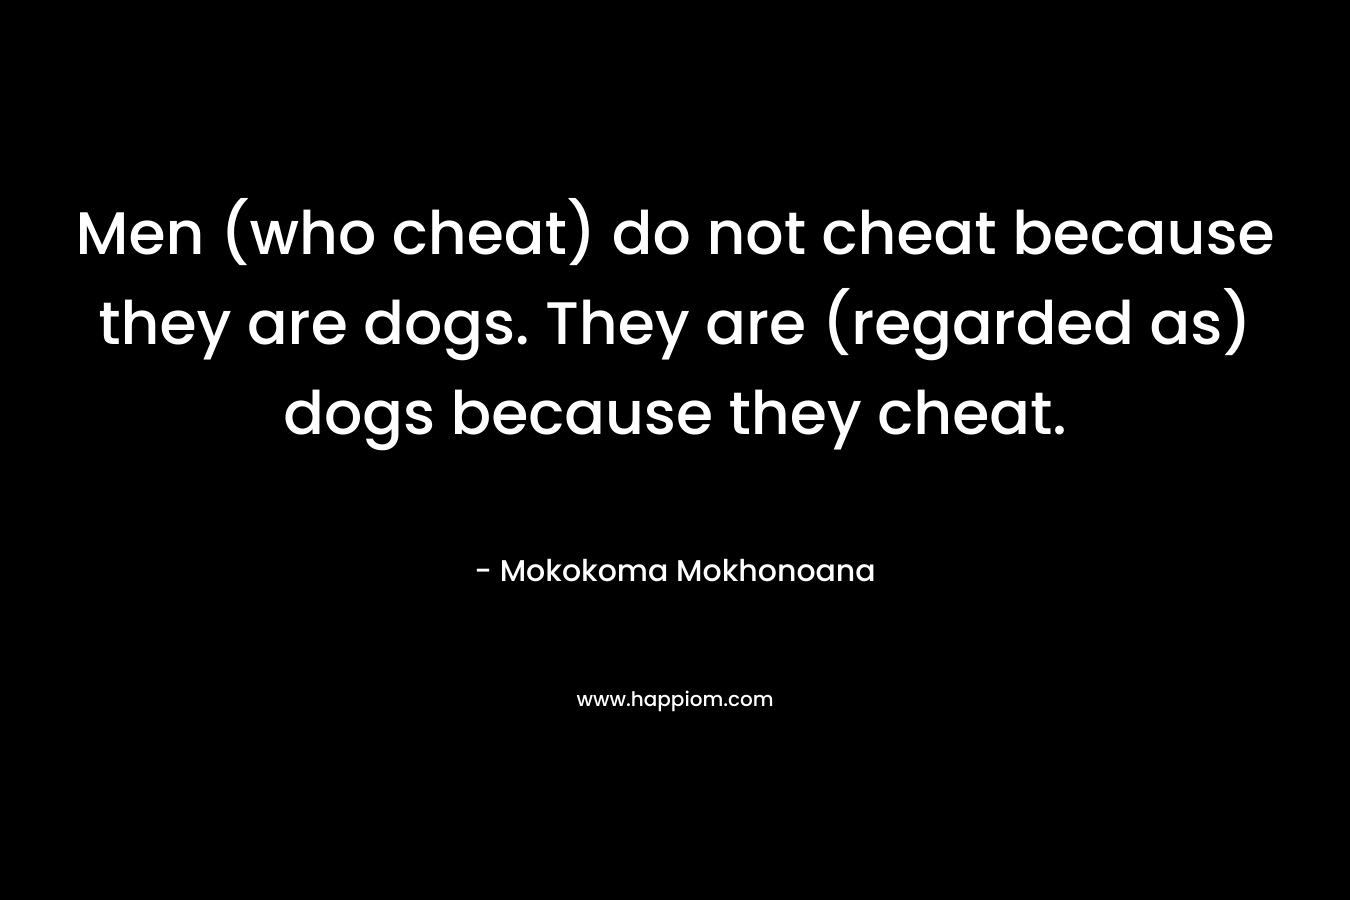 Men (who cheat) do not cheat because they are dogs. They are (regarded as) dogs because they cheat.